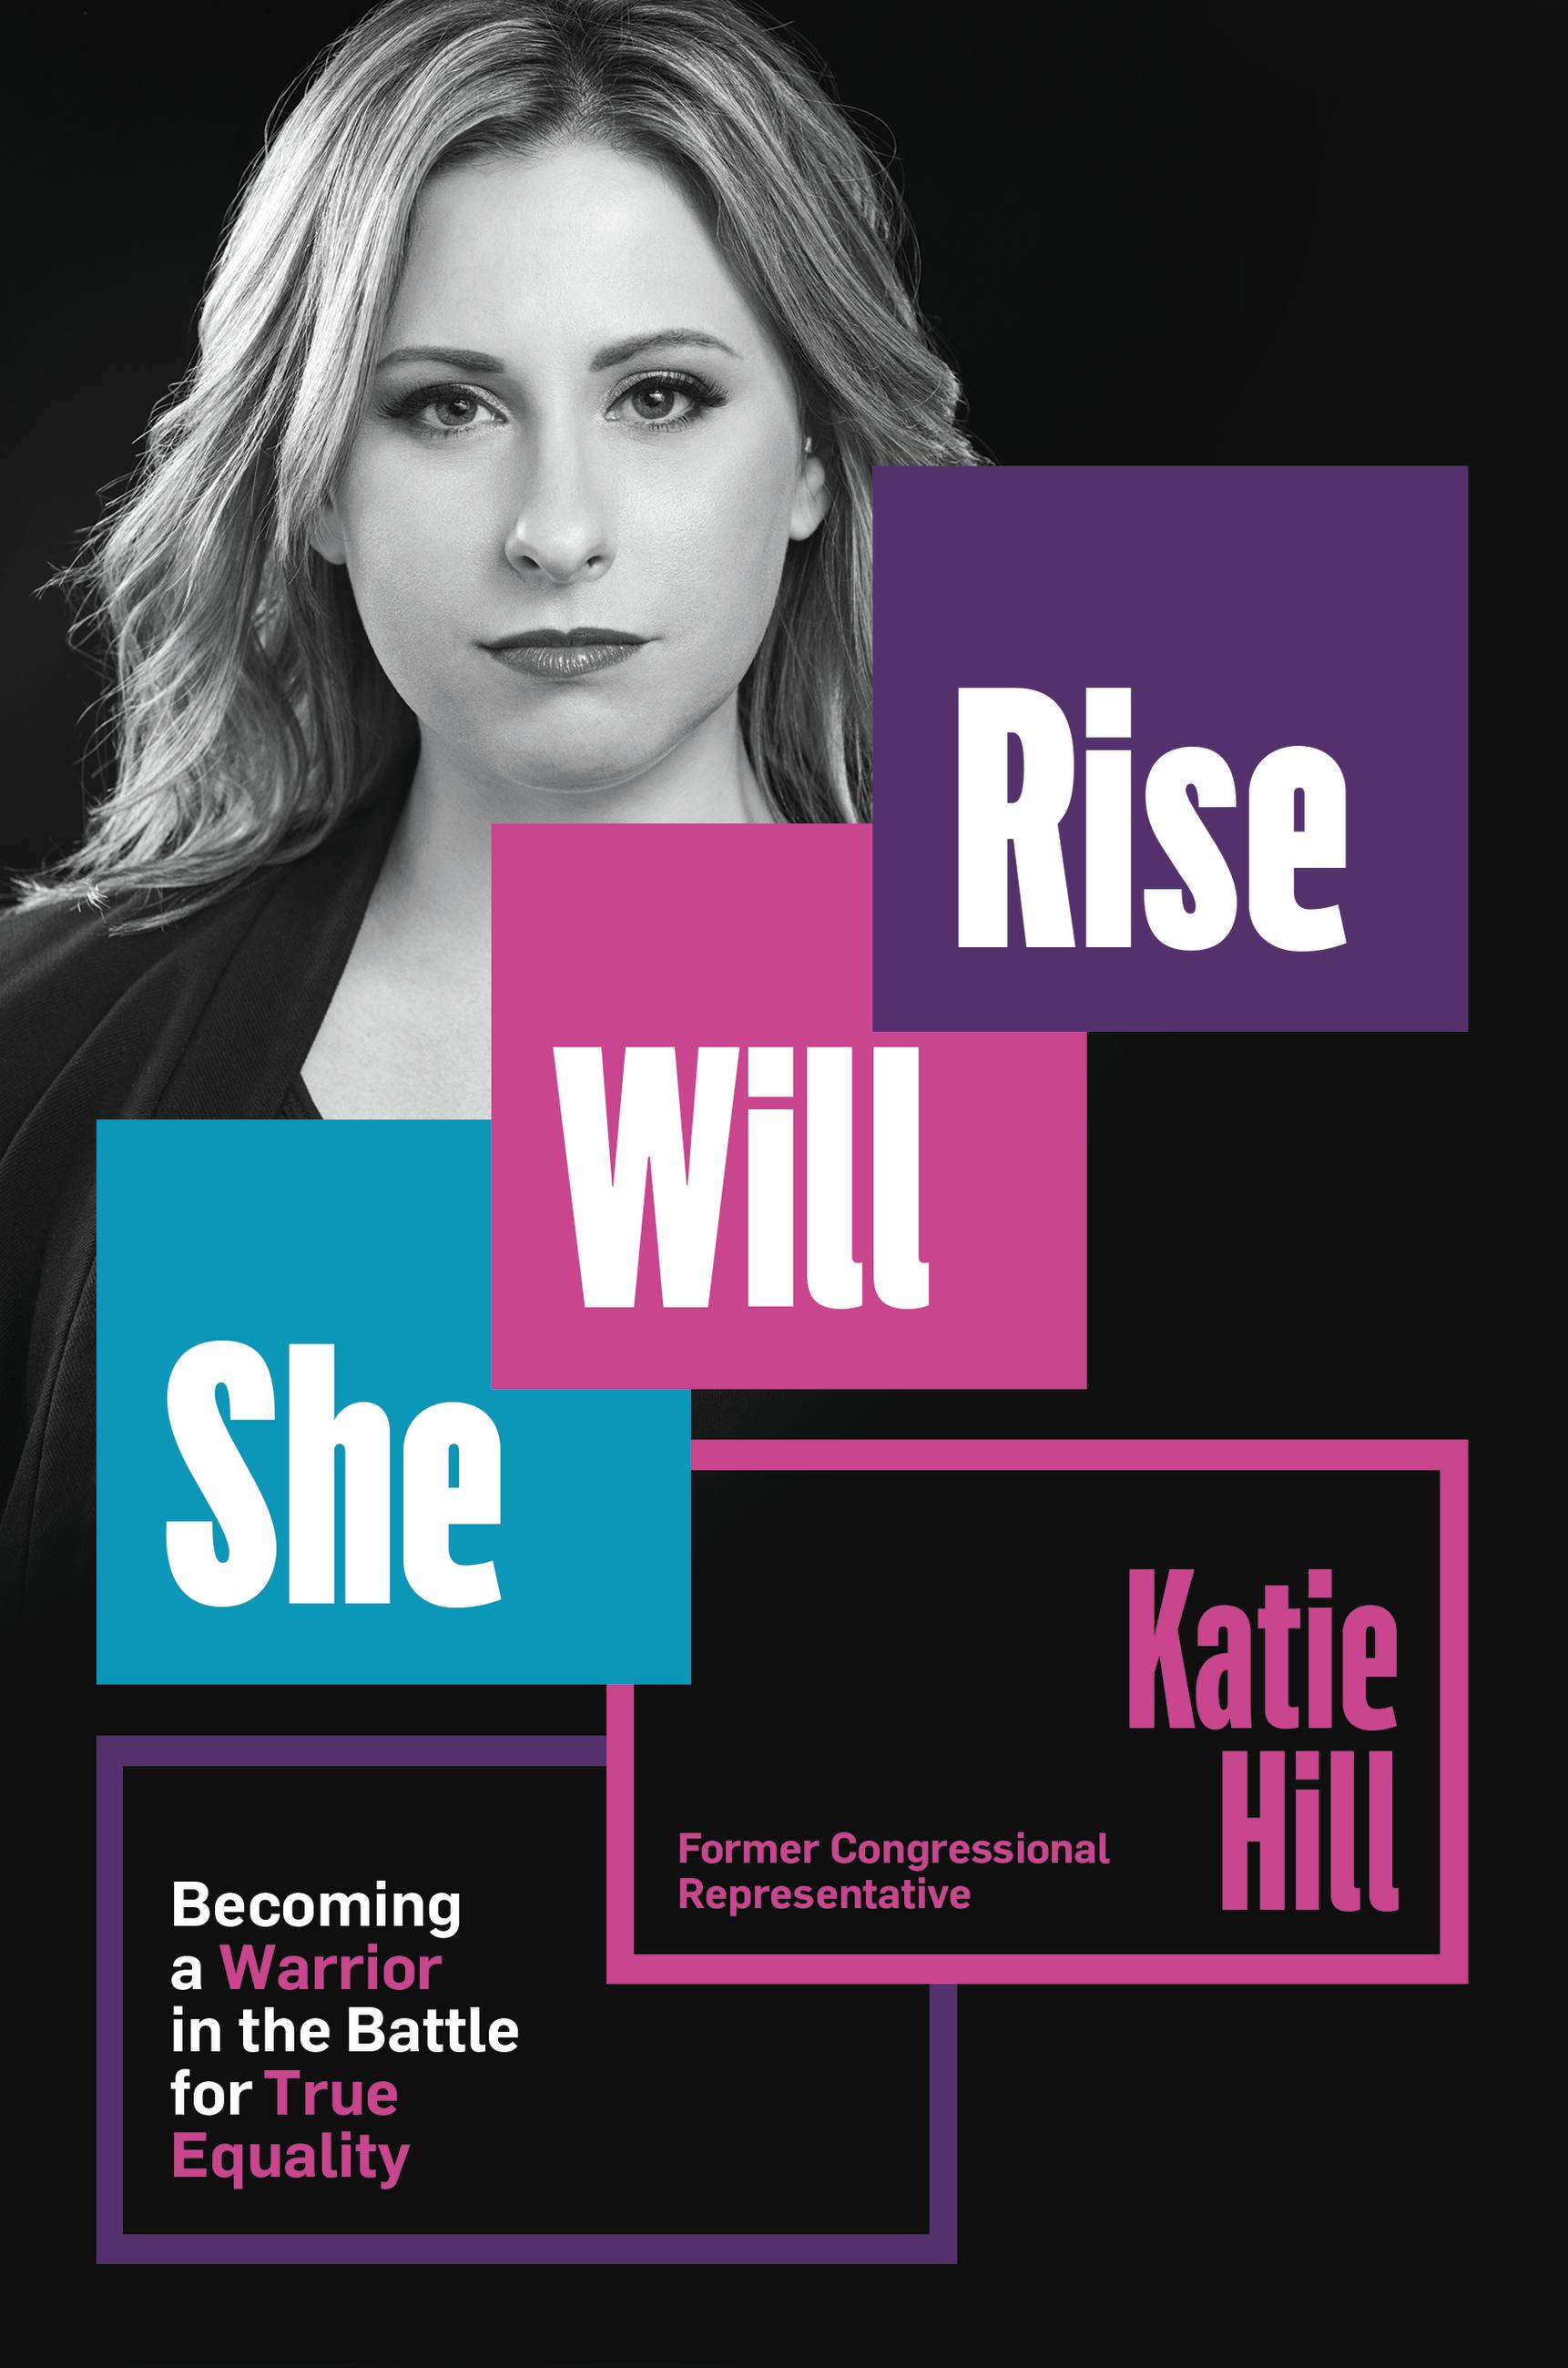 She Will Rise by Katie Hill | Hachette Book Group